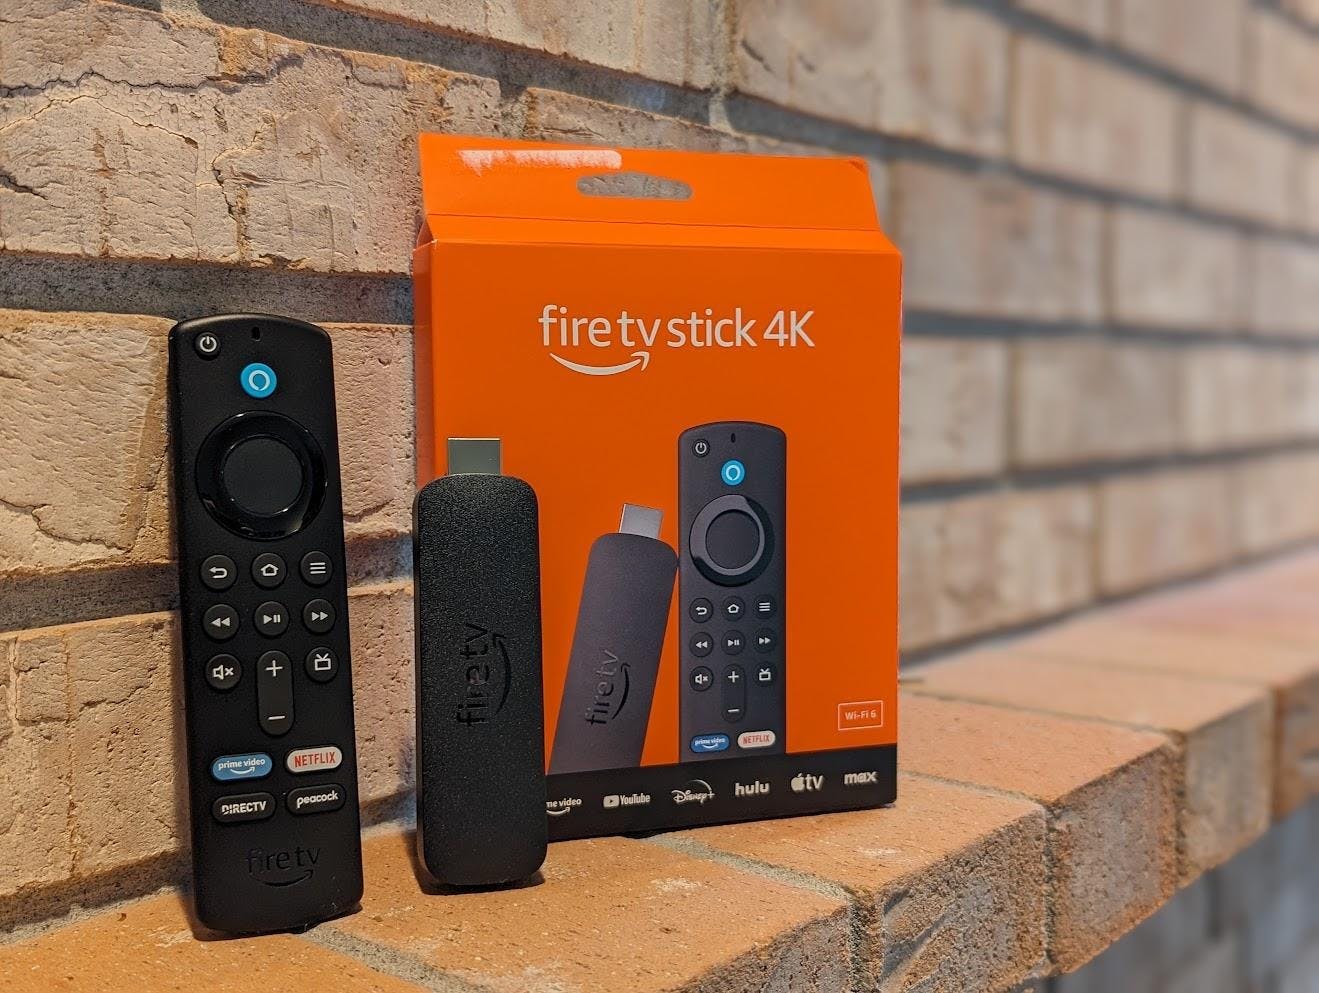 Fire TV Stick Lite vs. Fire TV Stick vs. Fire TV Stick 4K: What's